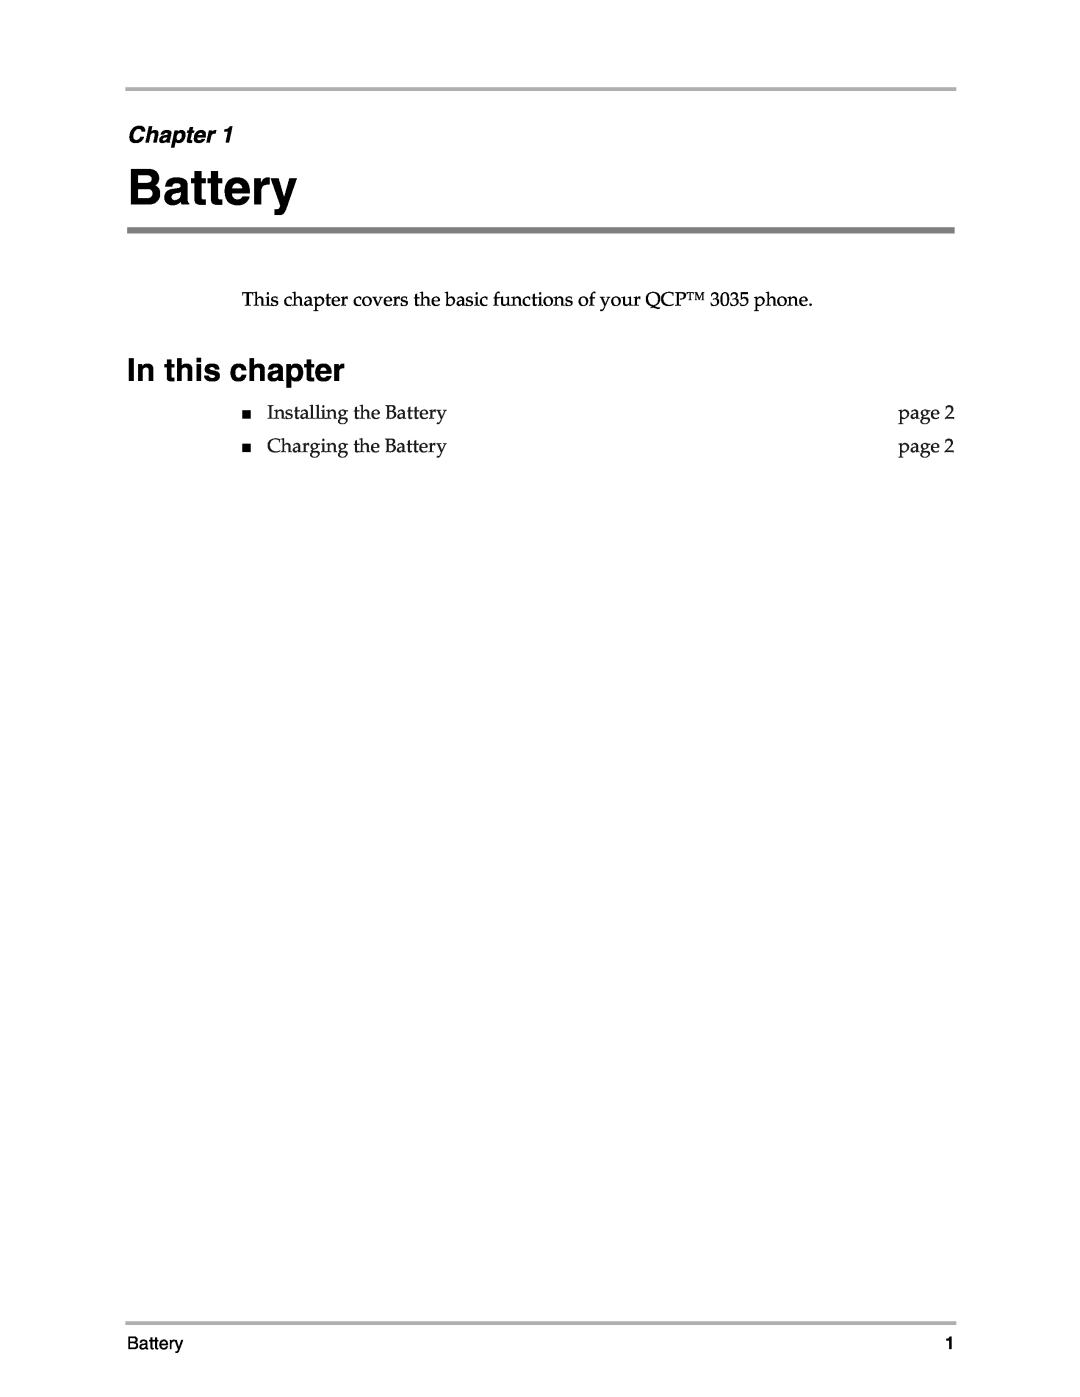 Kyocera 3035 manual In this chapter, Chapter, Installing the Battery, page, Charging the Battery 